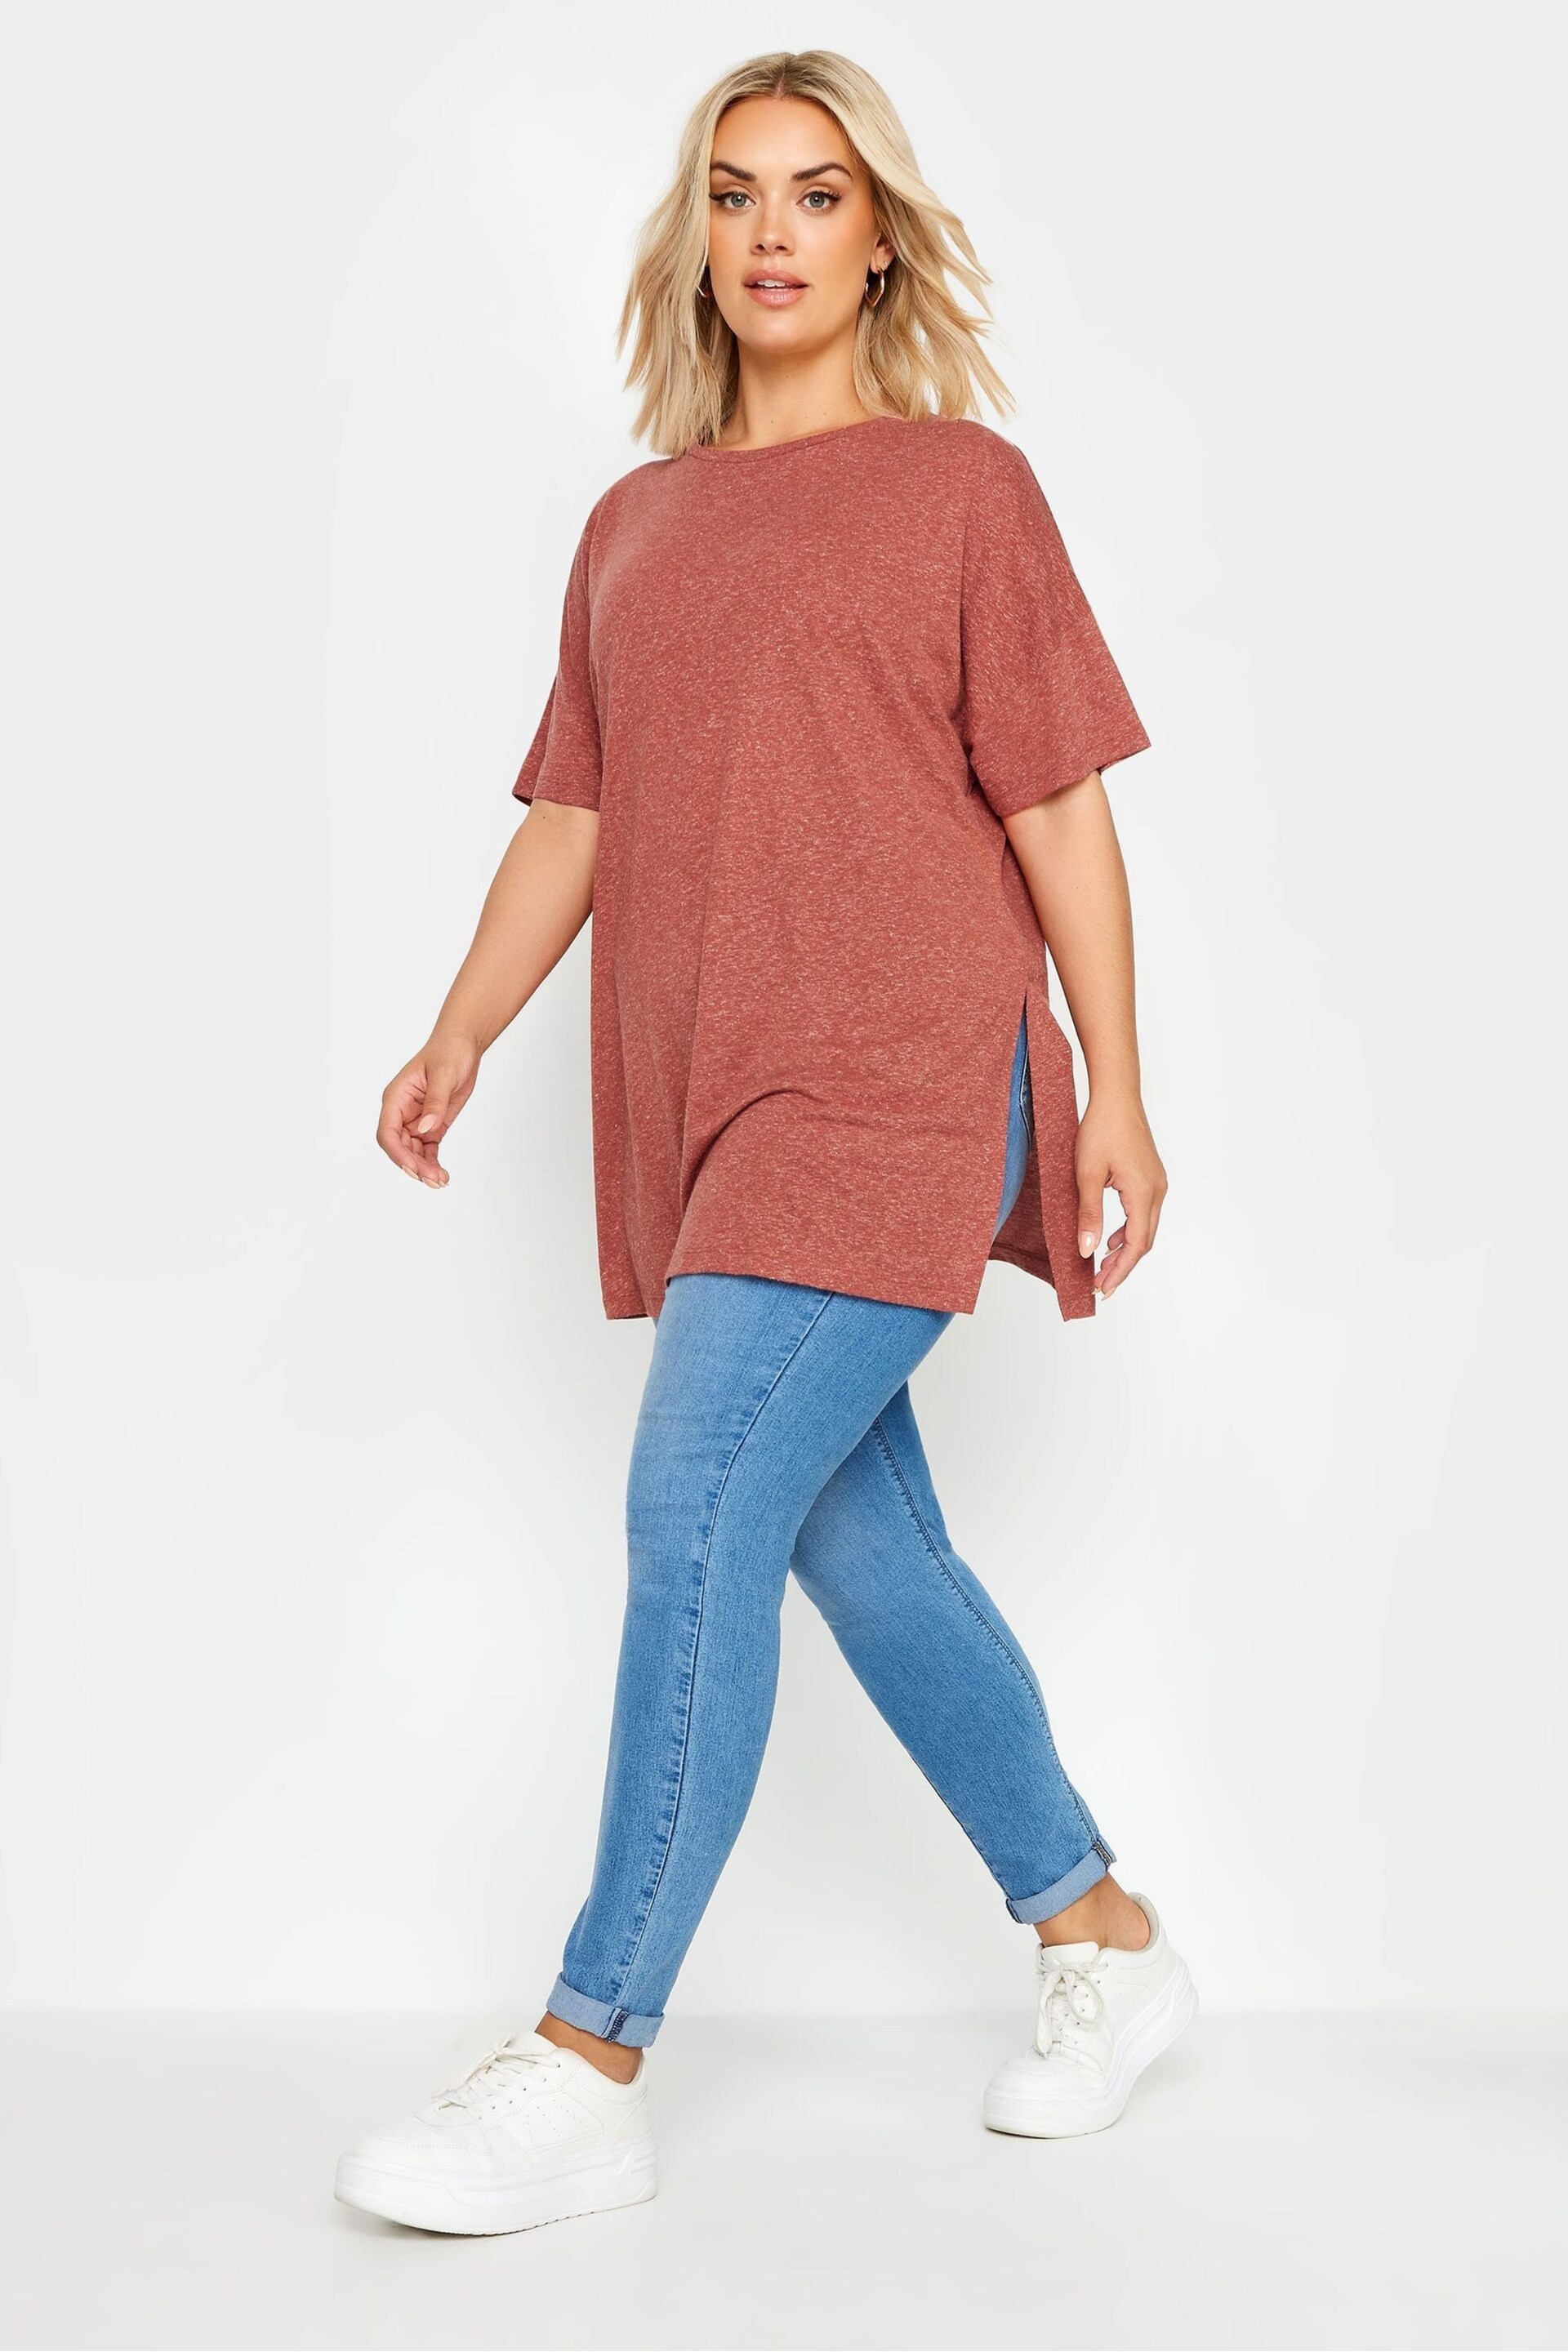 Yours Curve Red Oversize Side Split Linen Look T-Shirt - Image 2 of 5